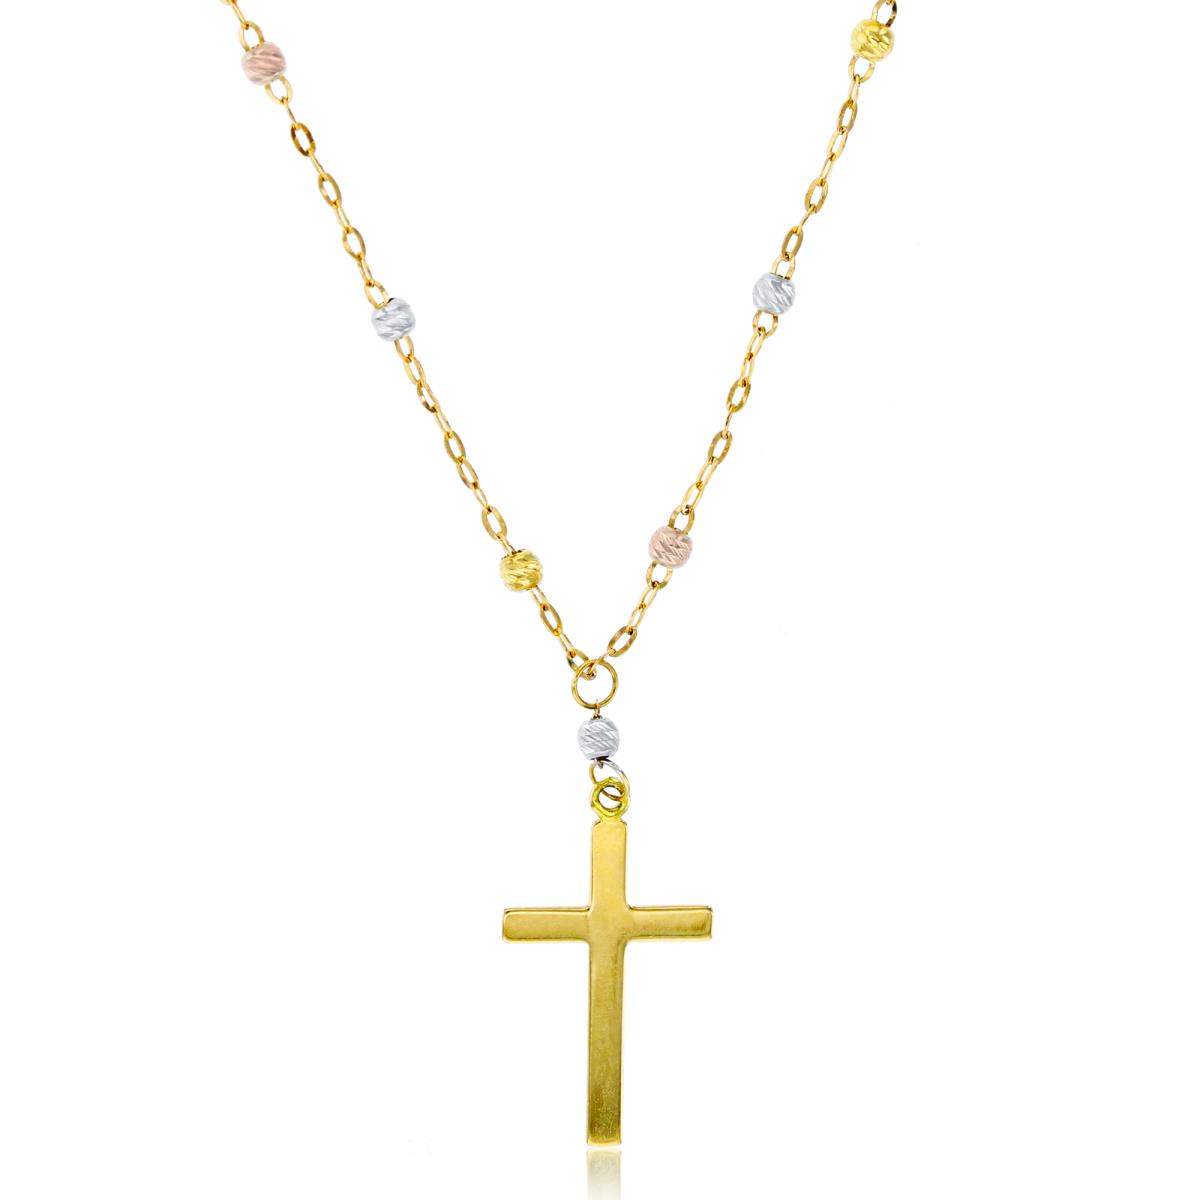 14K Tri-Color Gold Dangling Cross 17" DC Station Chain Necklace